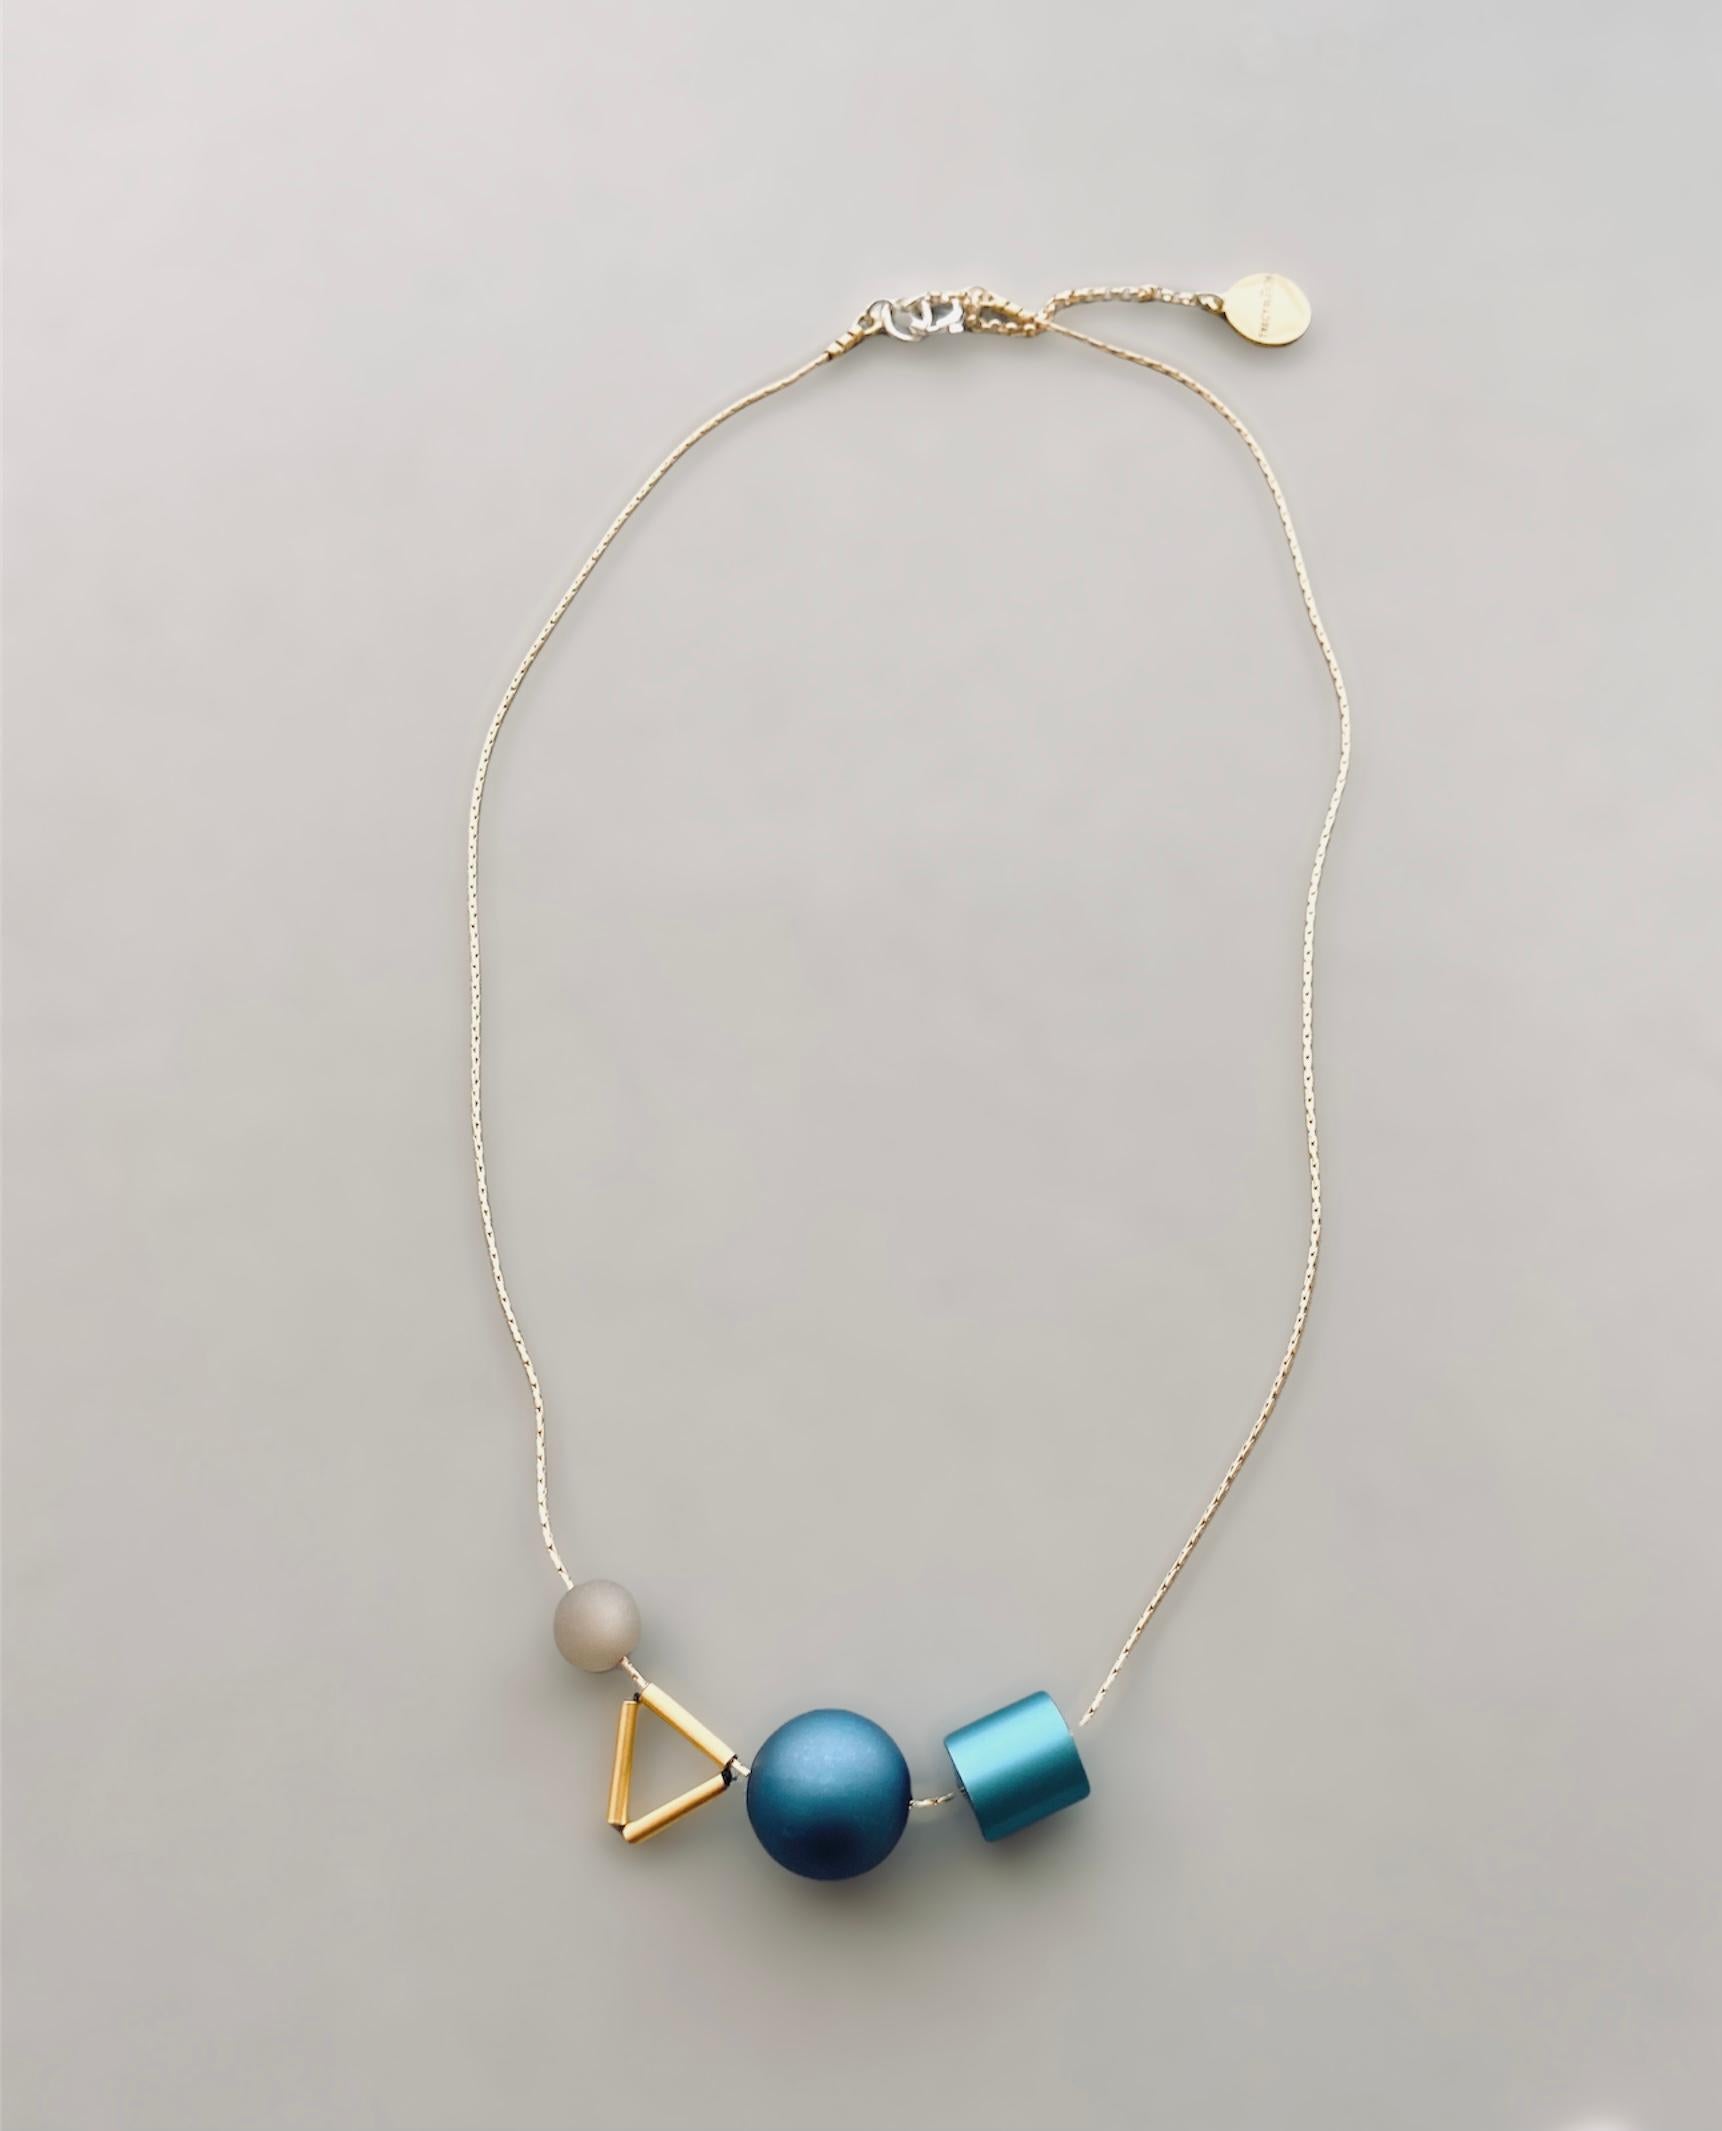 This satin finished aluminum necklace is a favorite among museums.  Very light weight, eye catching and artistic, the Aluminum Triangle necklace is made with aluminum and resin beads.  To add dimension and craft, a triangle group of brass beads is